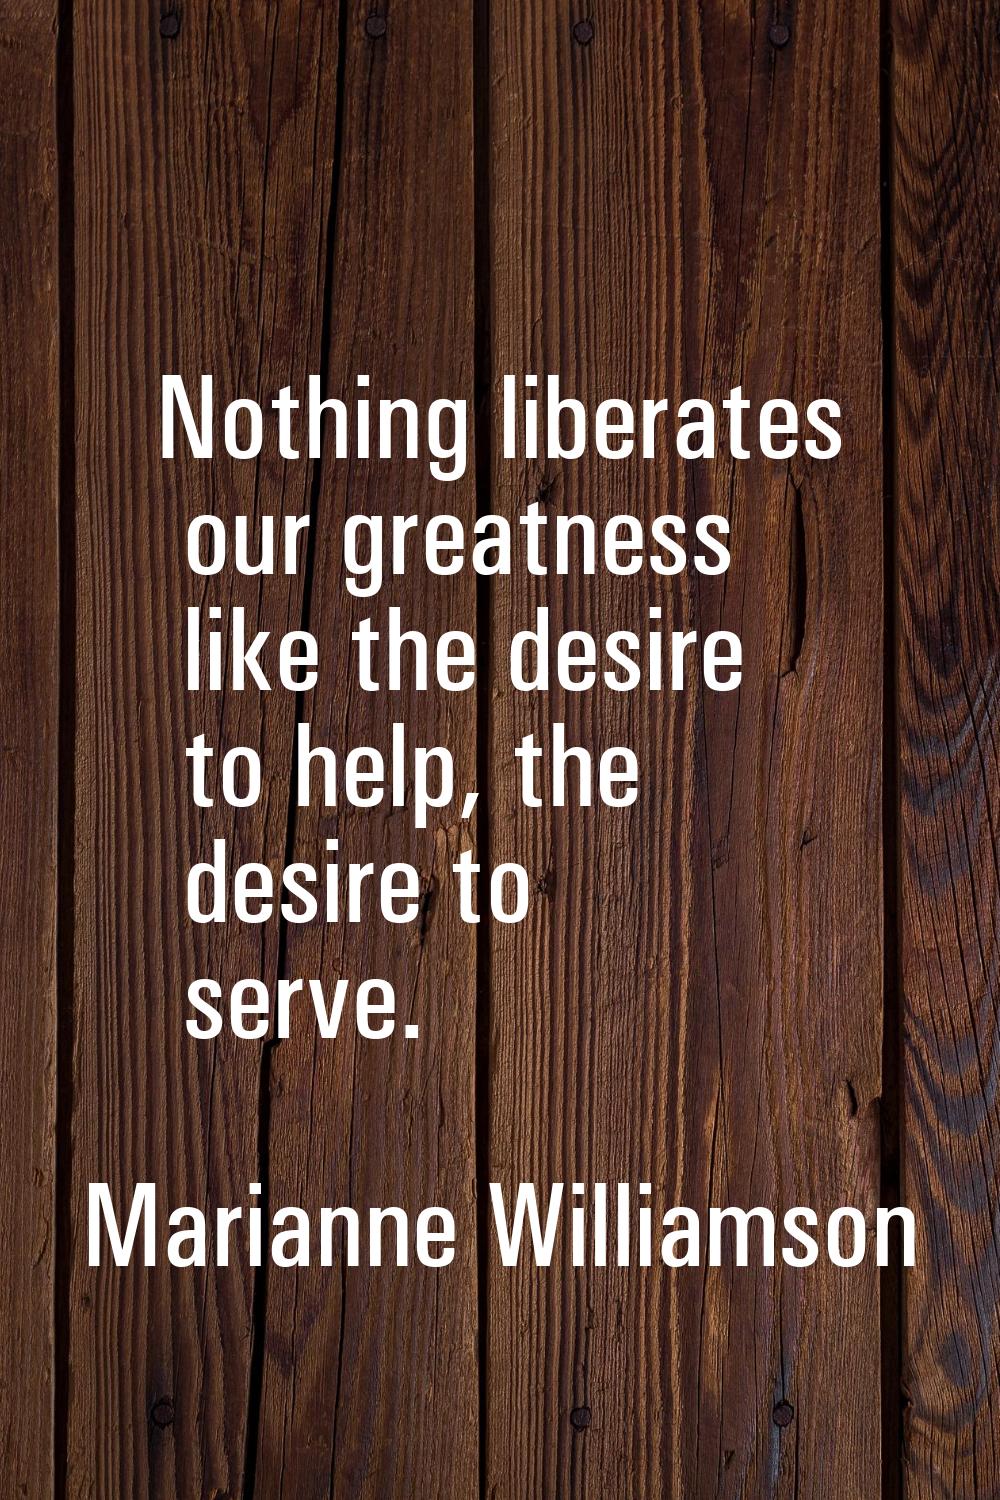 Nothing liberates our greatness like the desire to help, the desire to serve.